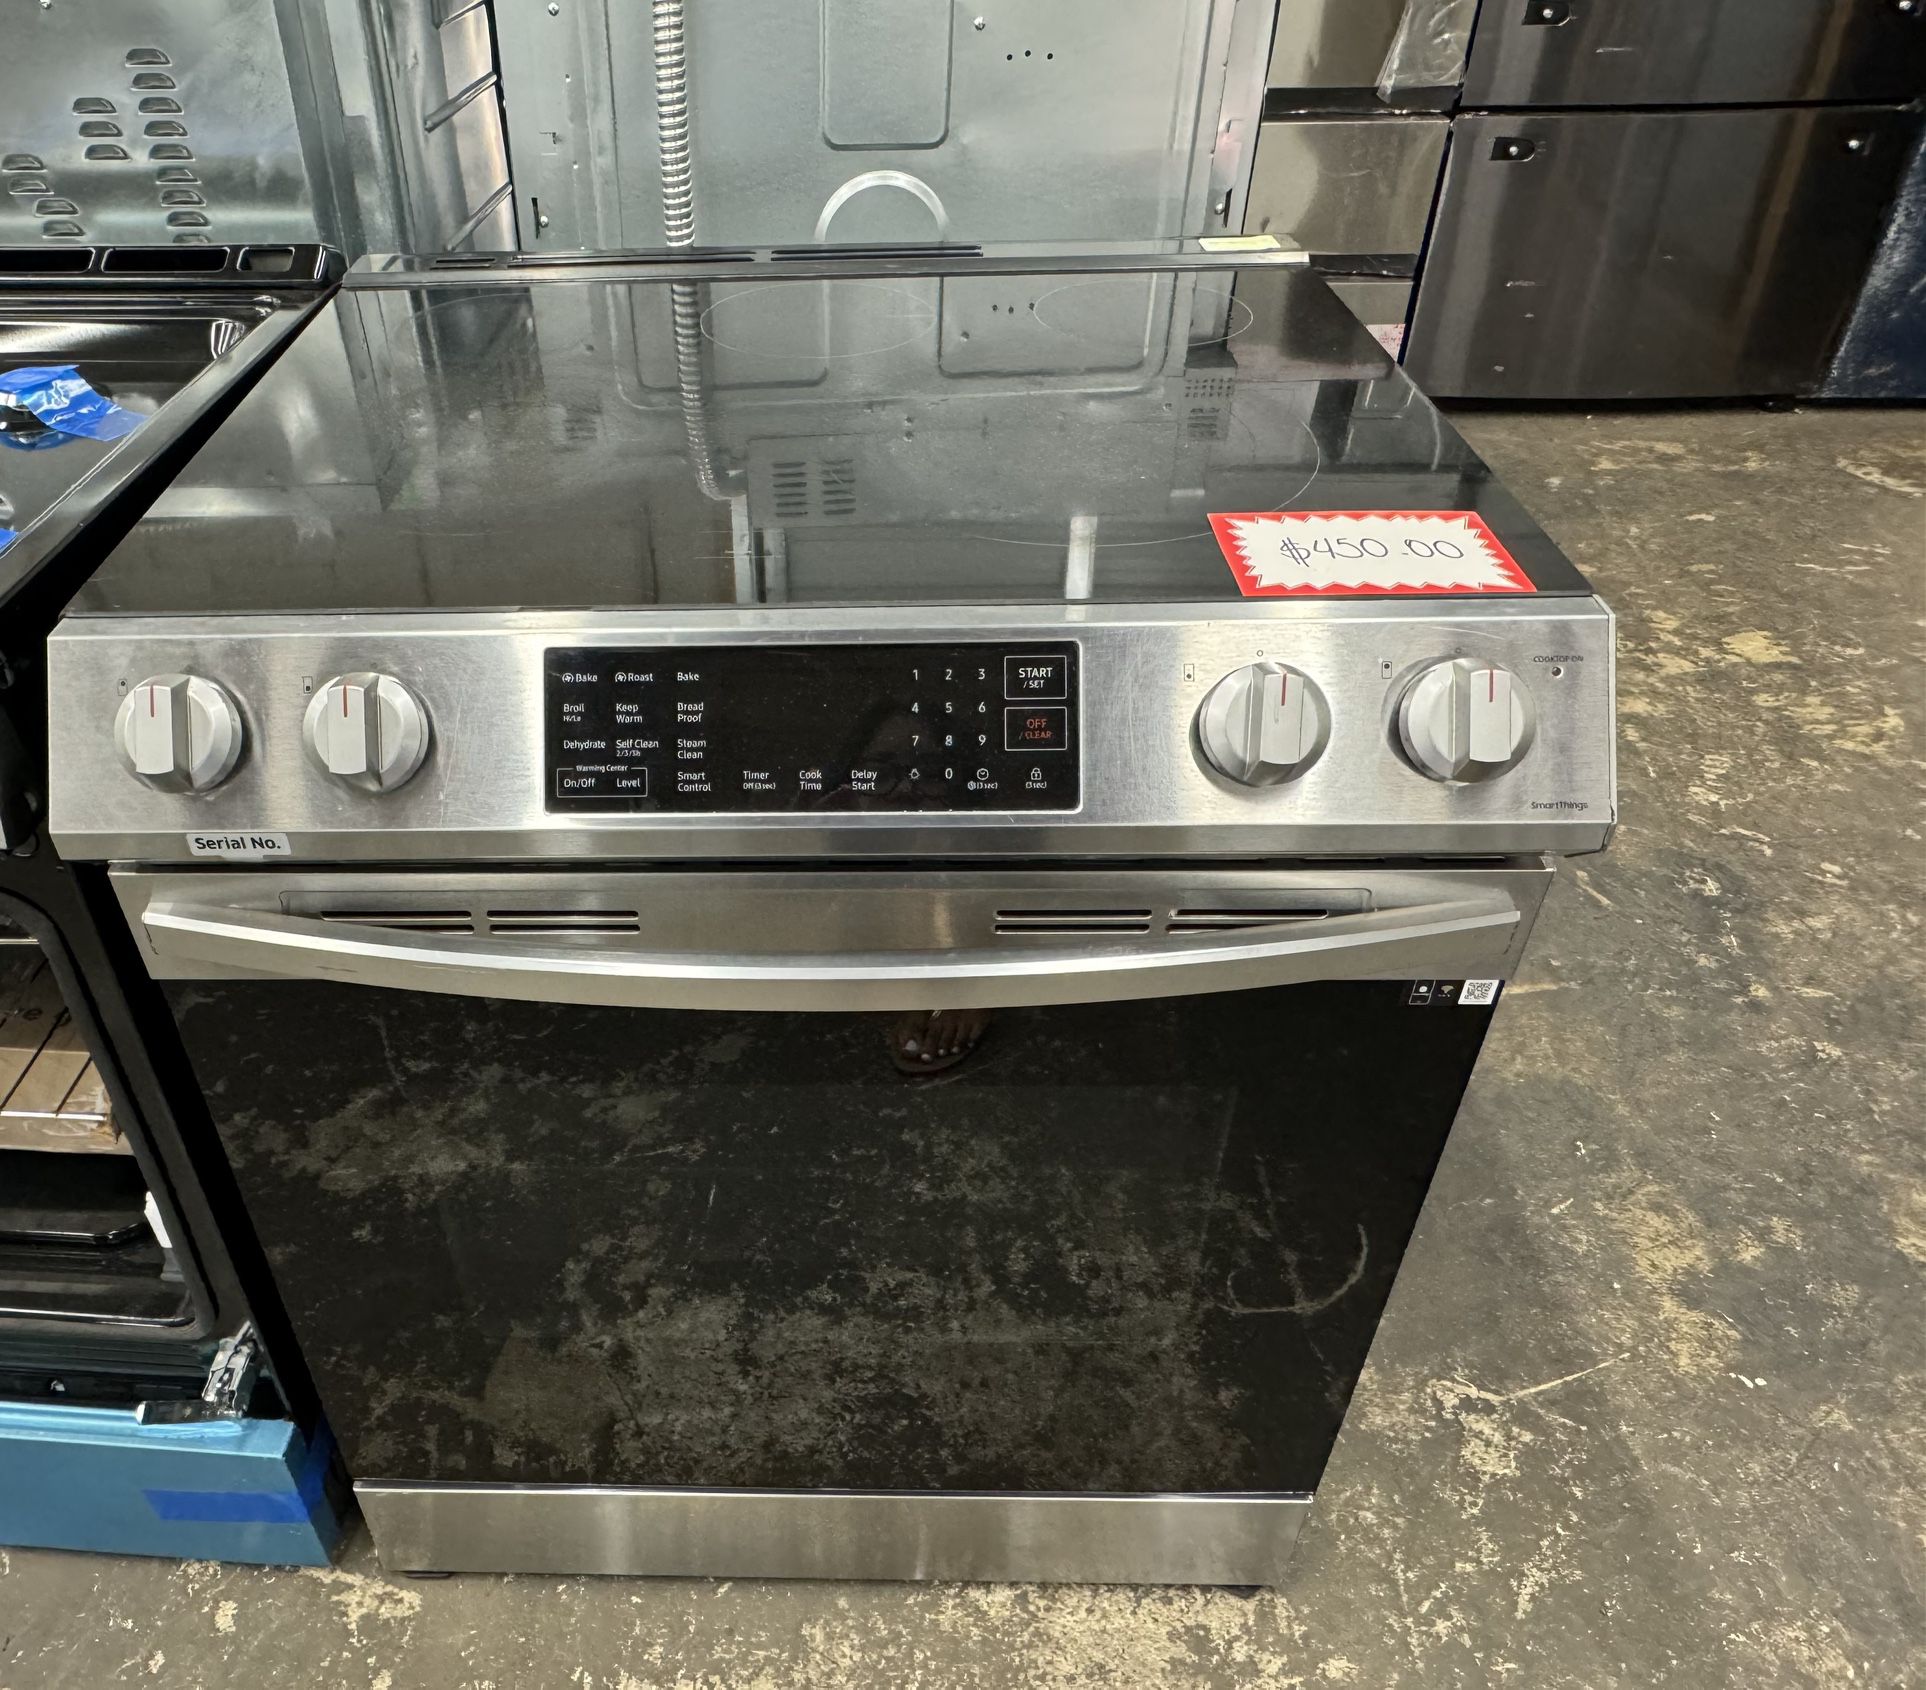 Samsung Slide In 30in Electric Stove 4 Months Warranty We Are Located In The Blue Building 🟦